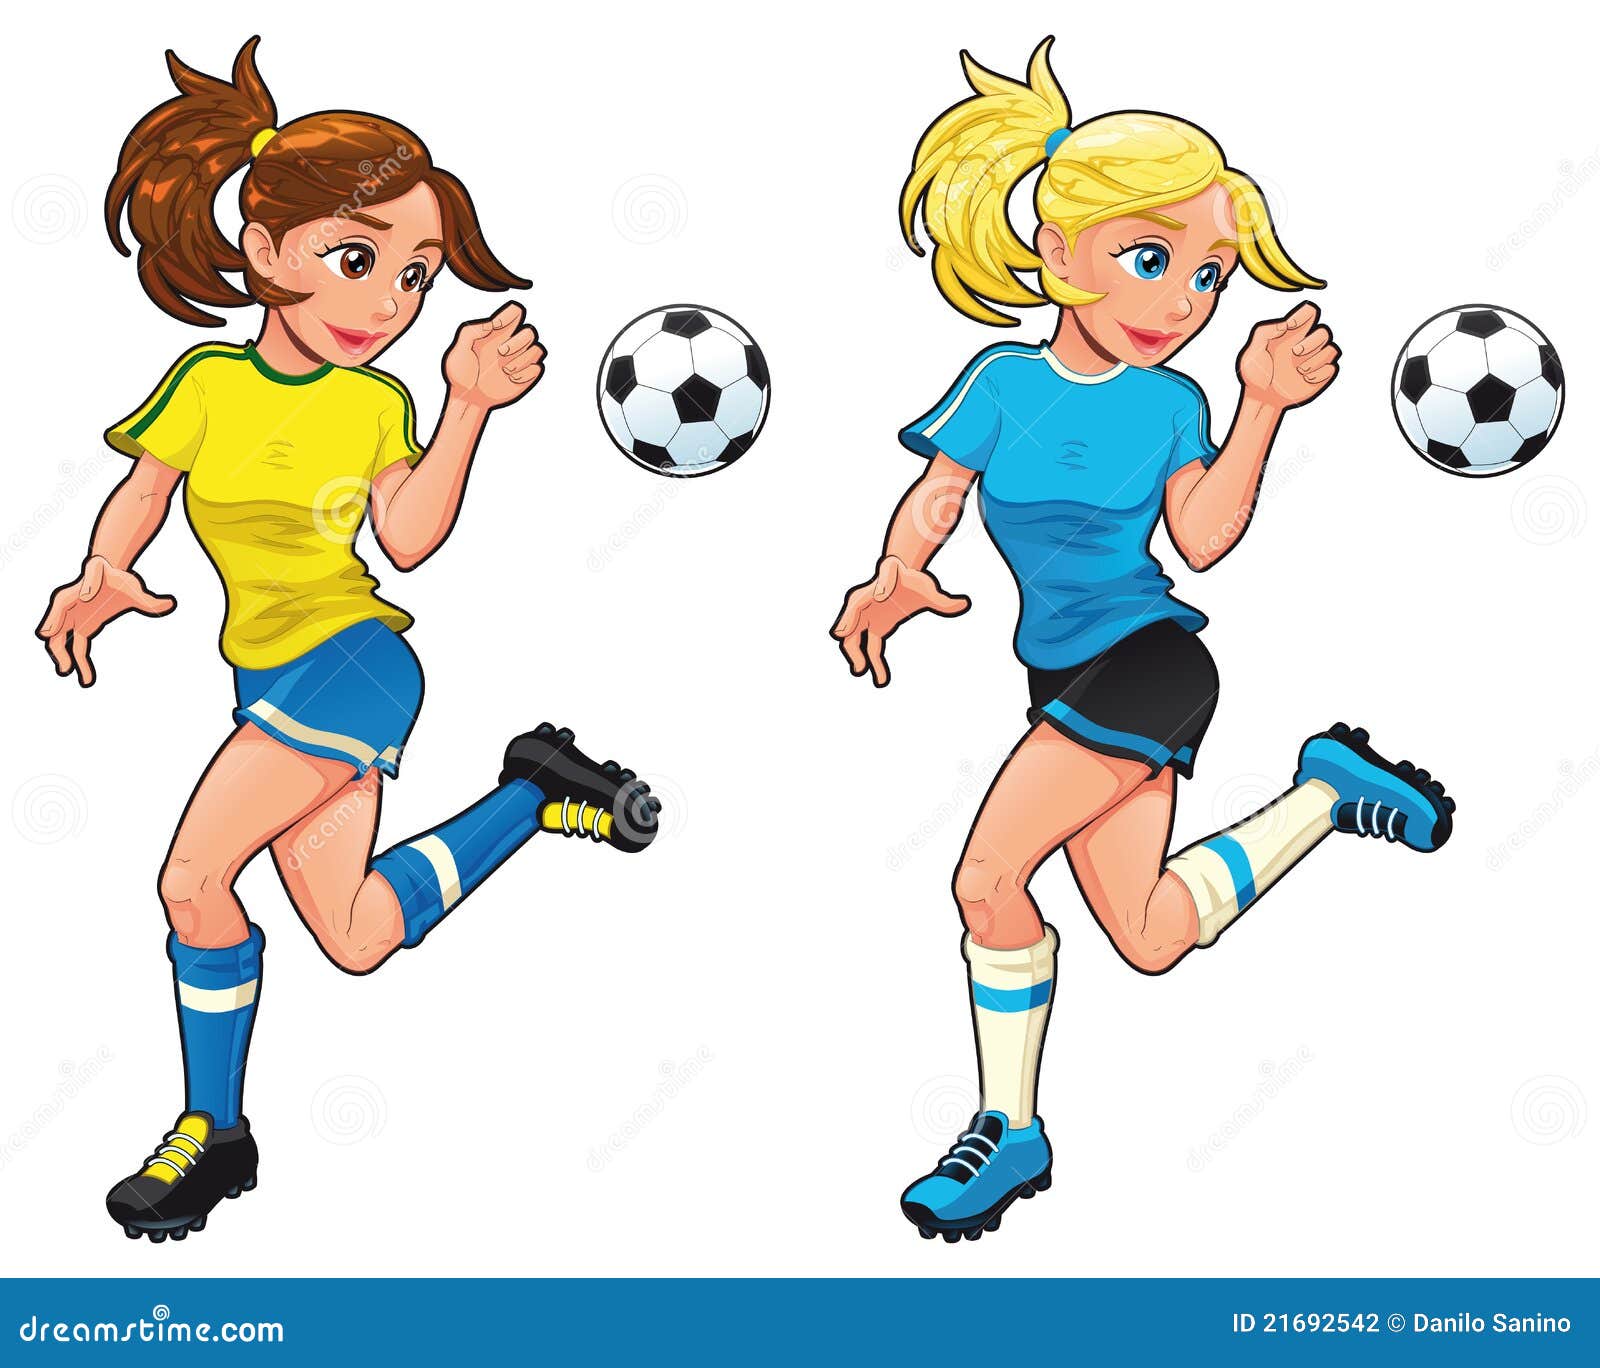 clipart girl playing soccer - photo #12